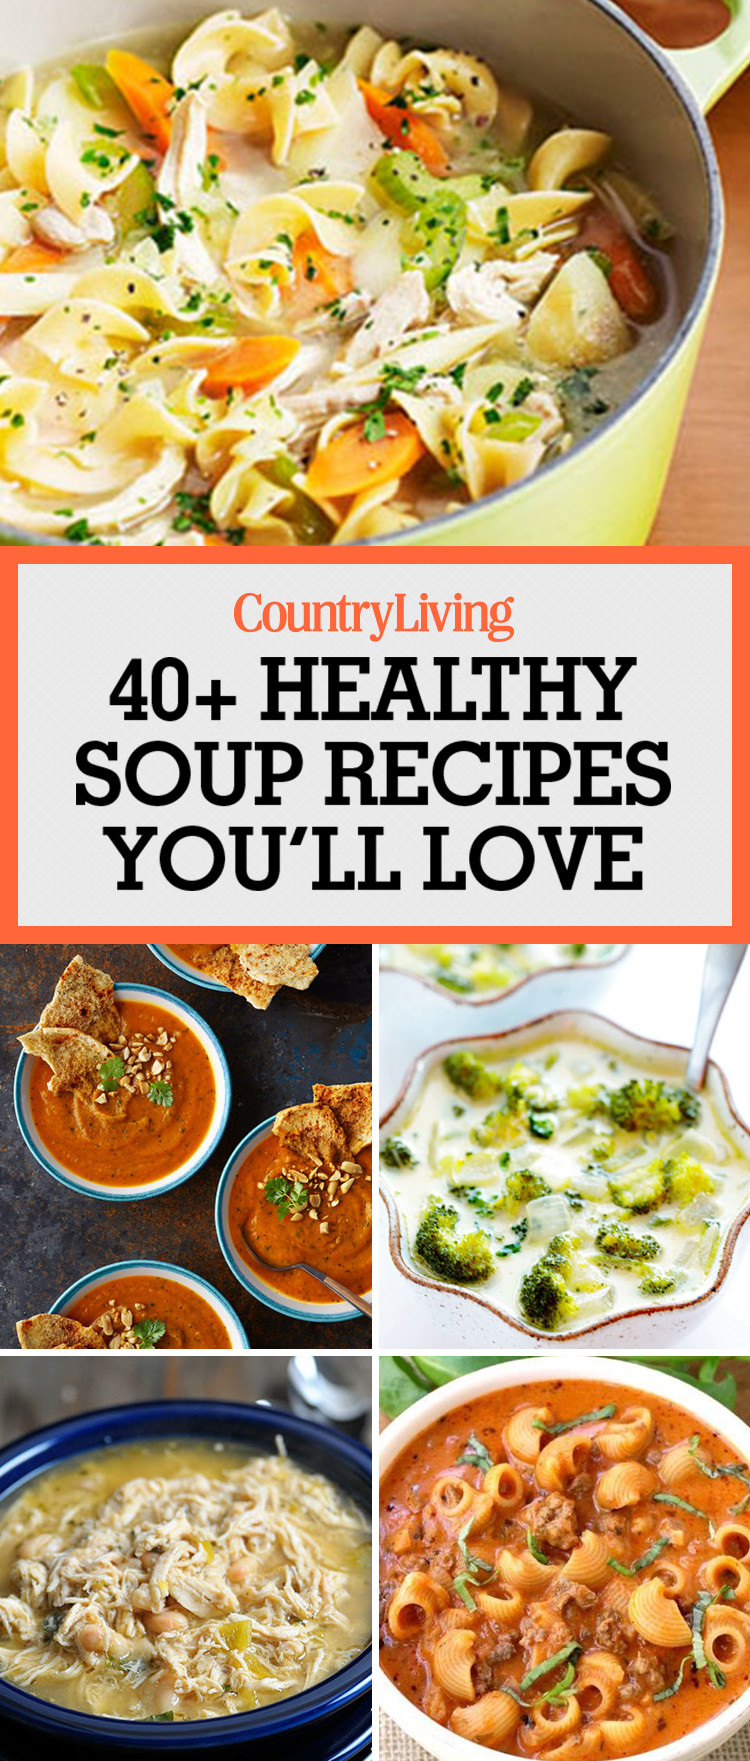 Healthy Soups To Make
 49 Best Healthy Soup Recipes Quick & Easy Low Calorie Soups